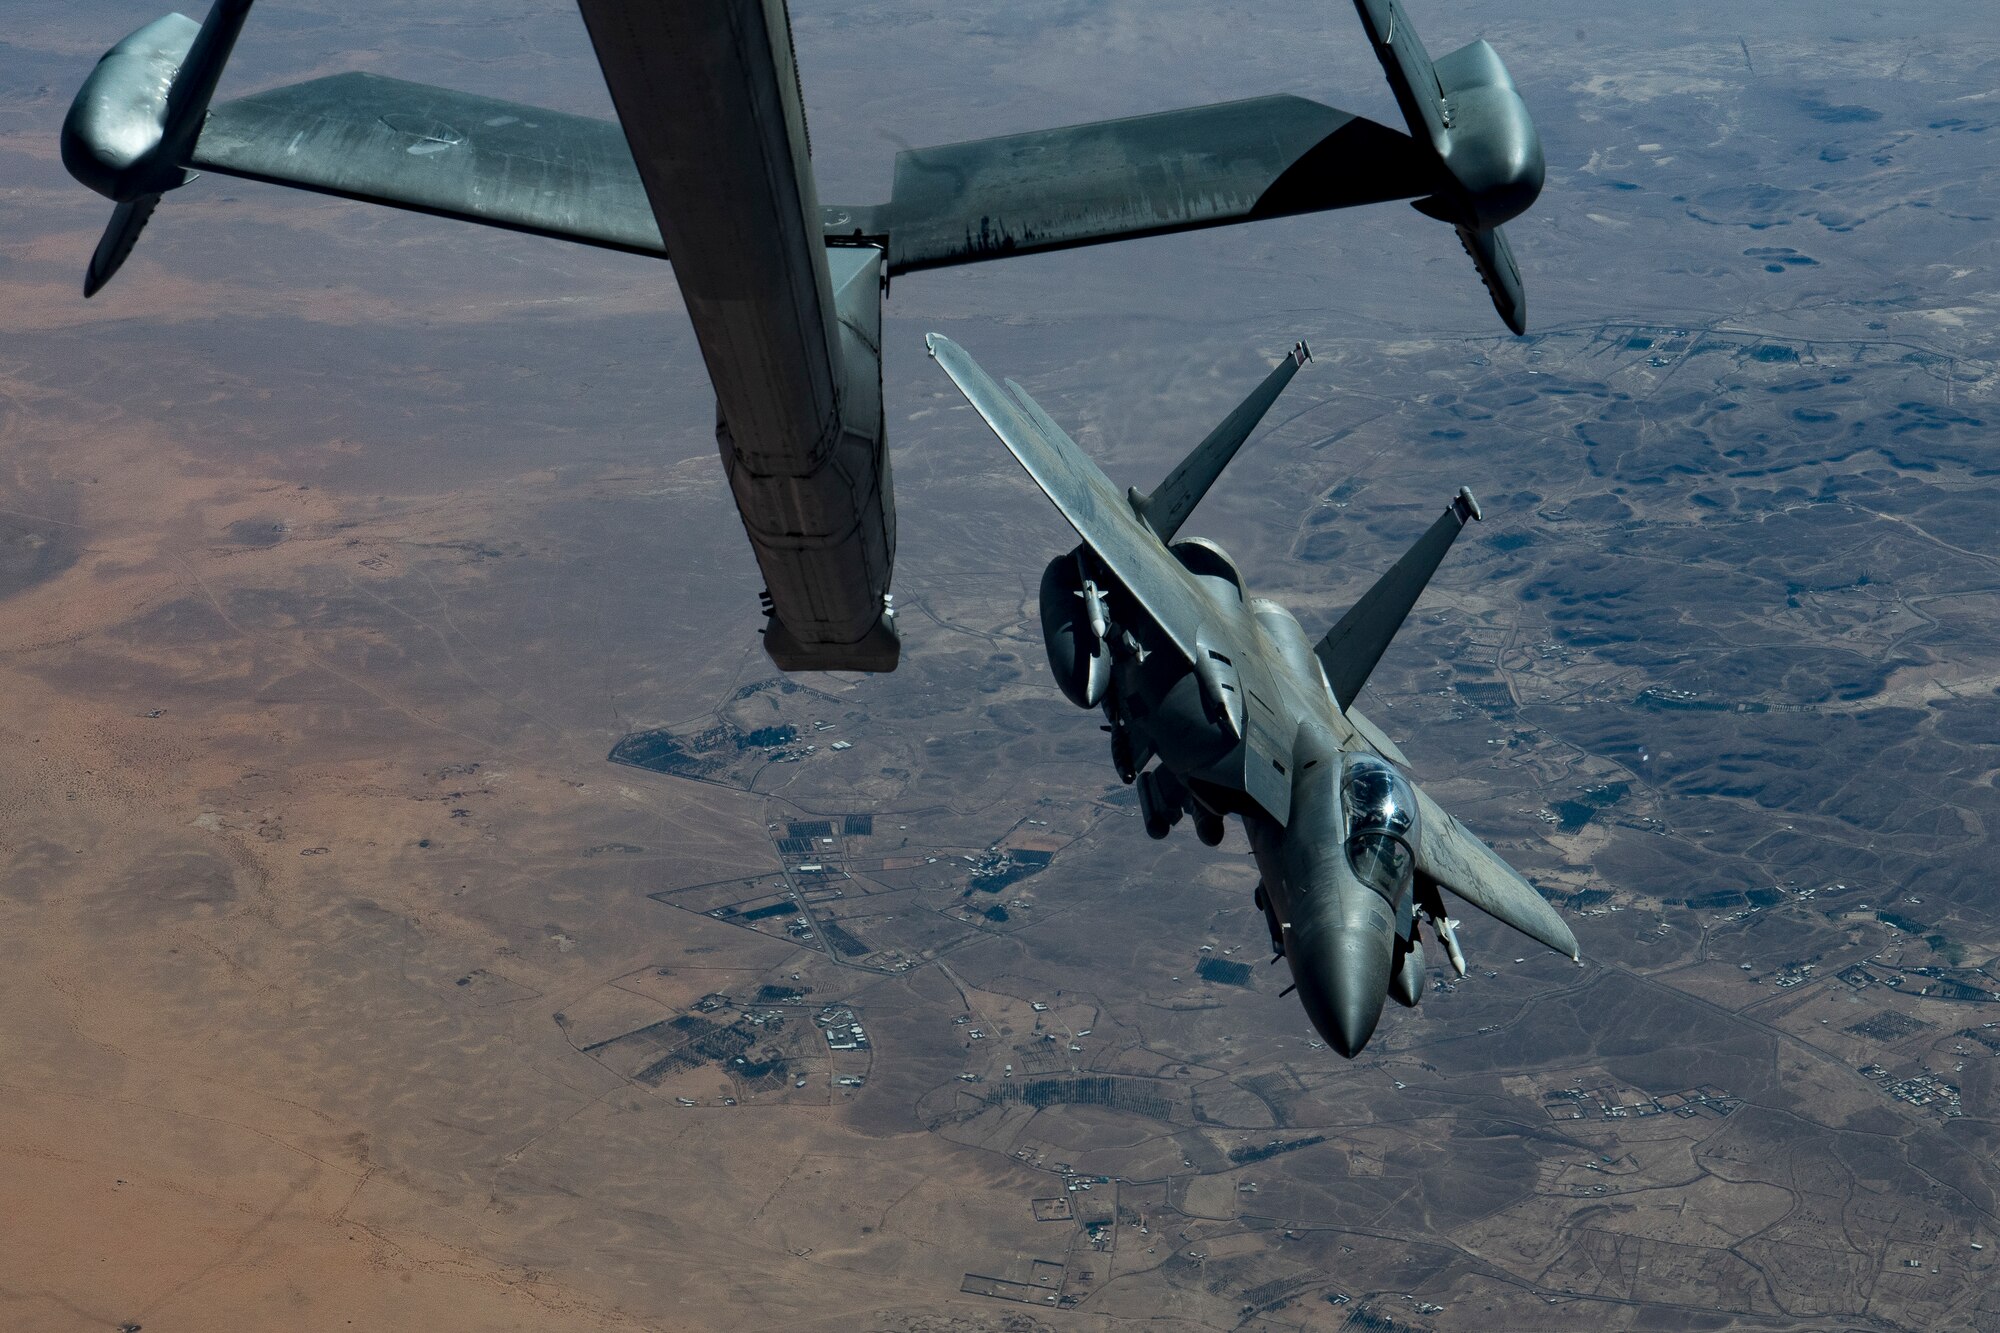 A U.S. Air Force F-15E Strike Eagle assigned to the 494th Expeditionary Fighter Squadron breaks away after being in-air refueled by a KC-10 Extender assigned to the 908th Expeditionary Air Refueling Squadron above the U.S. Central Command area of responsibility, Jan. 13, 2020.